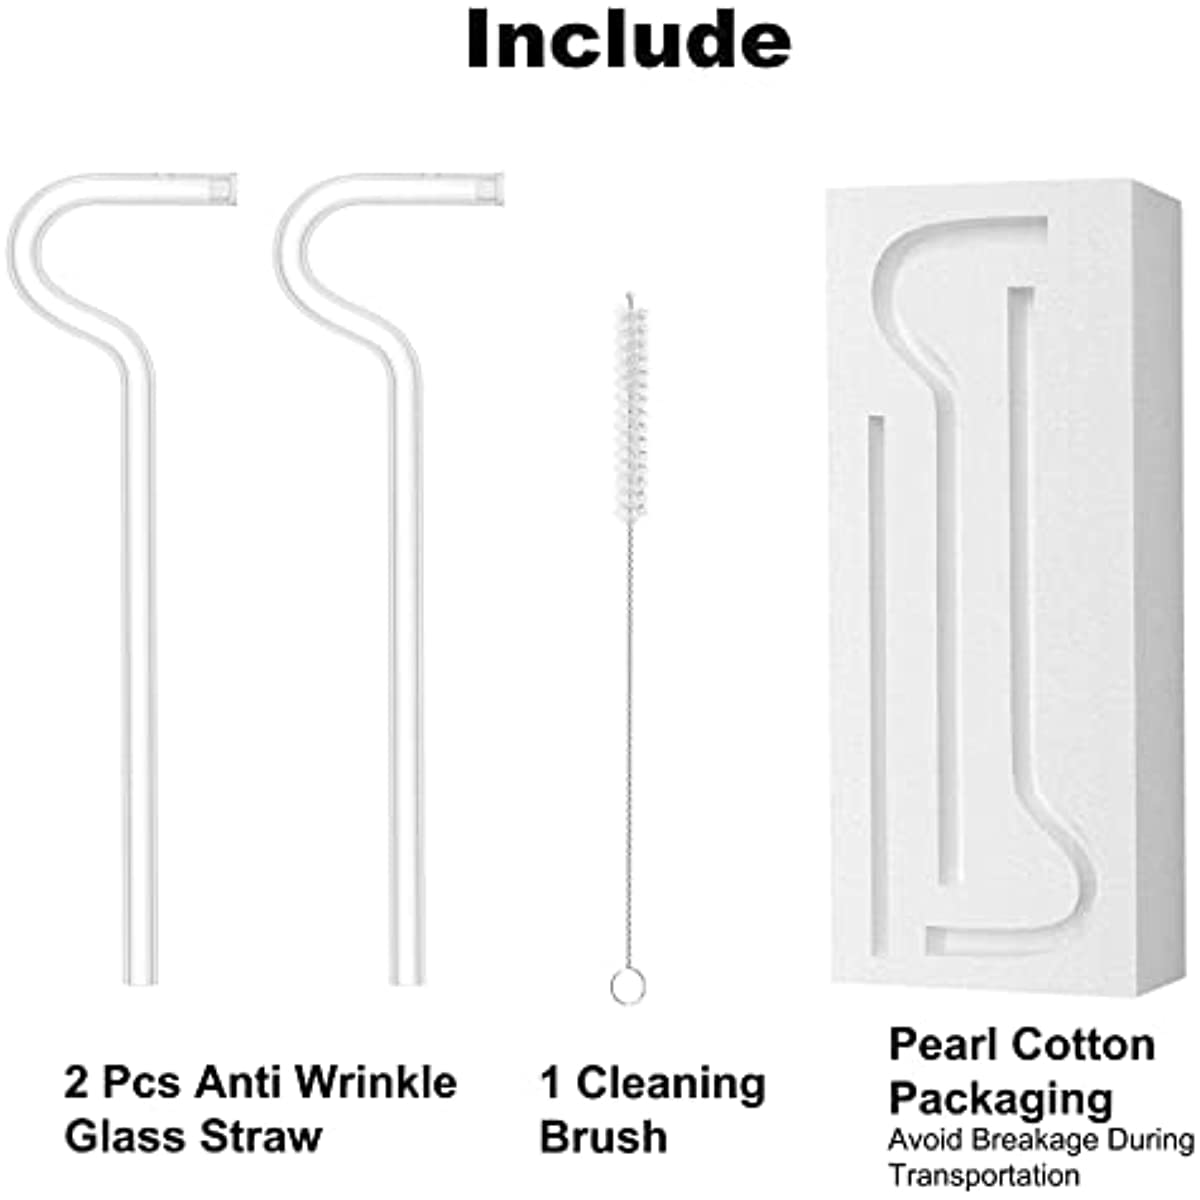 2pcs Anti Wrinkle Straw, Reusable Glass Straw For Stanley Cup, Anti Wrinkle  Drinking Straw Curved, Lip Straw For Wrinkles, No Wrinkle Straws, Side